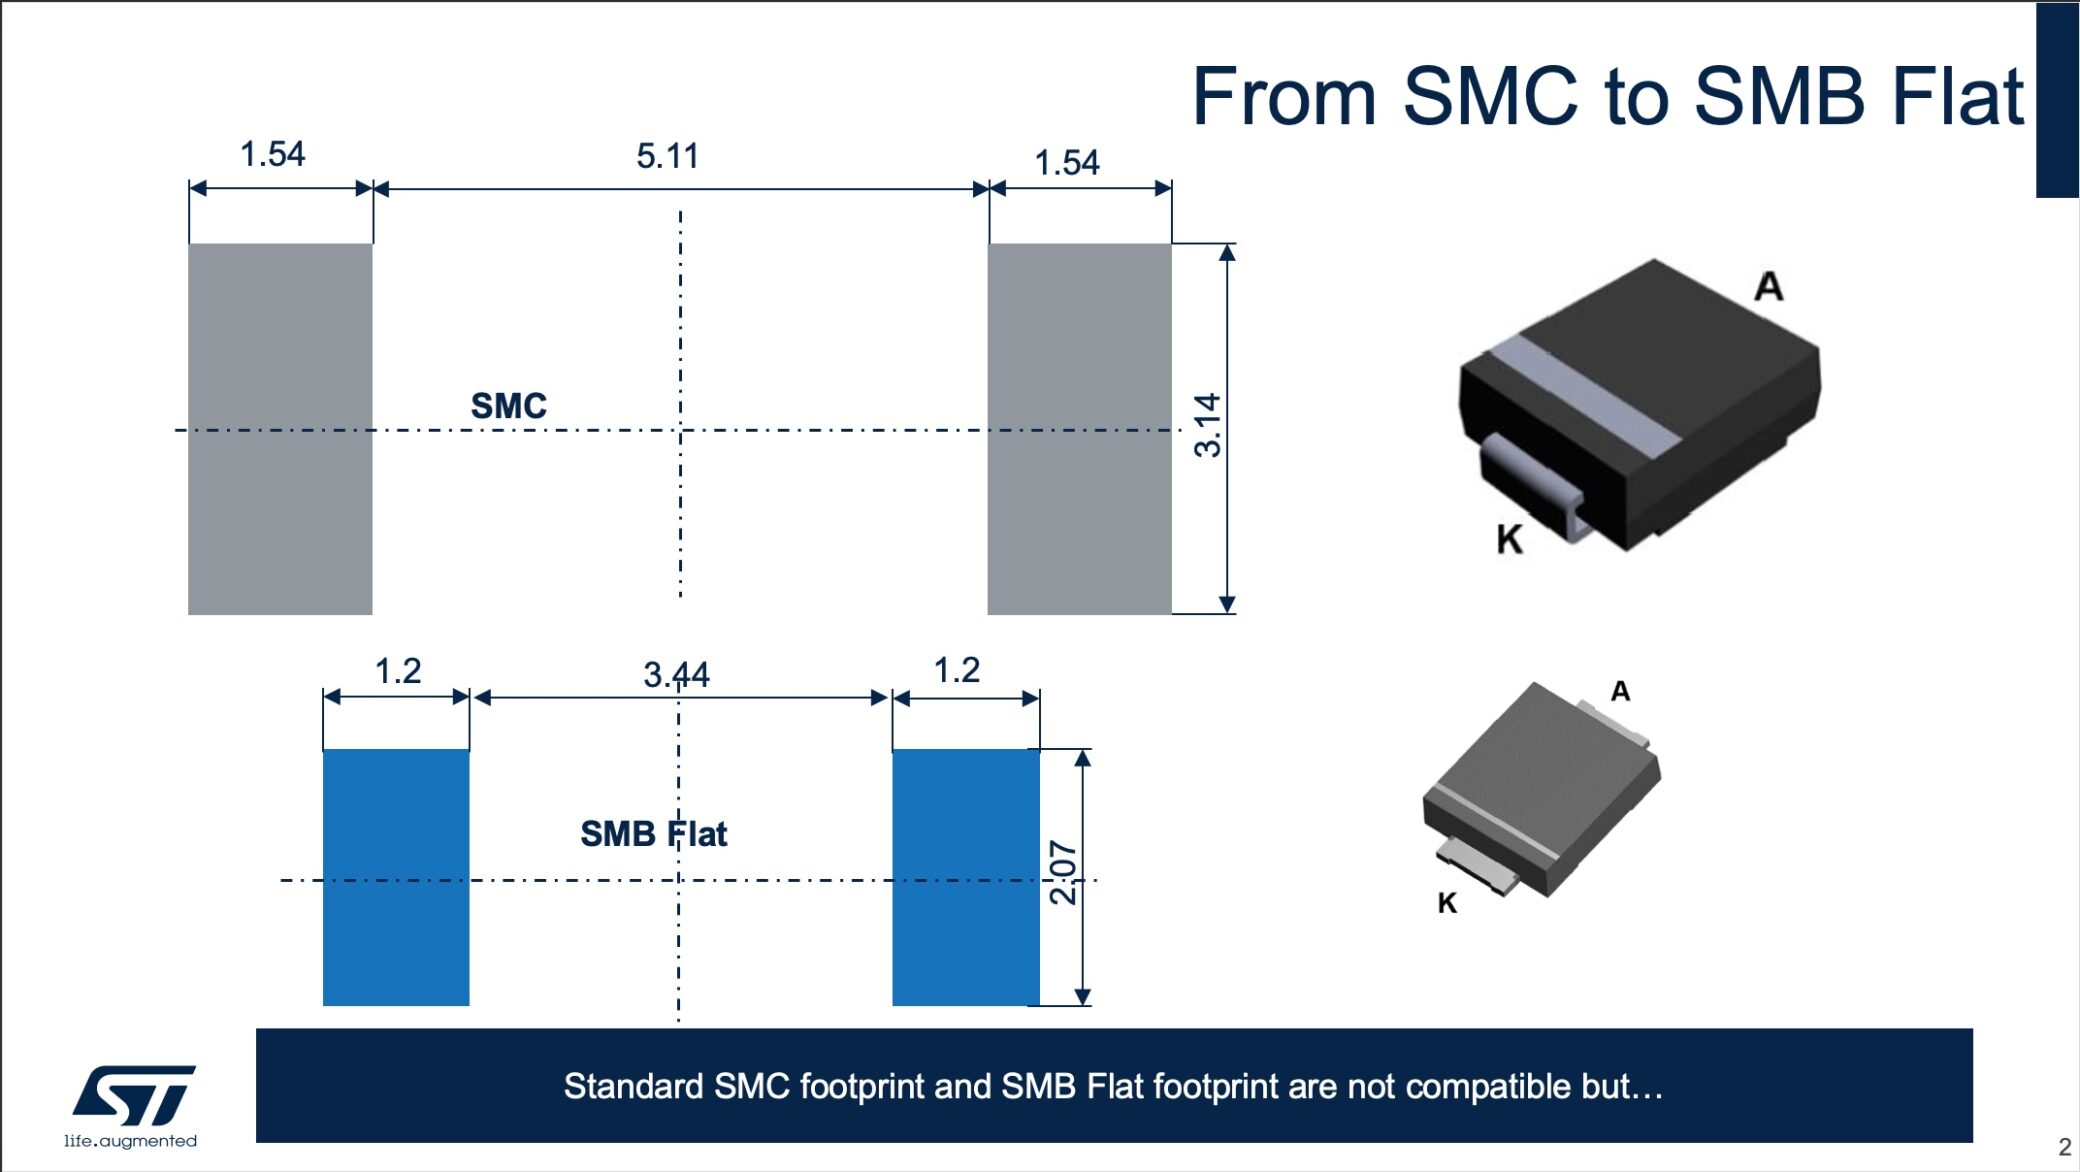 Difference in footprint between SMC and SMB Flat packages